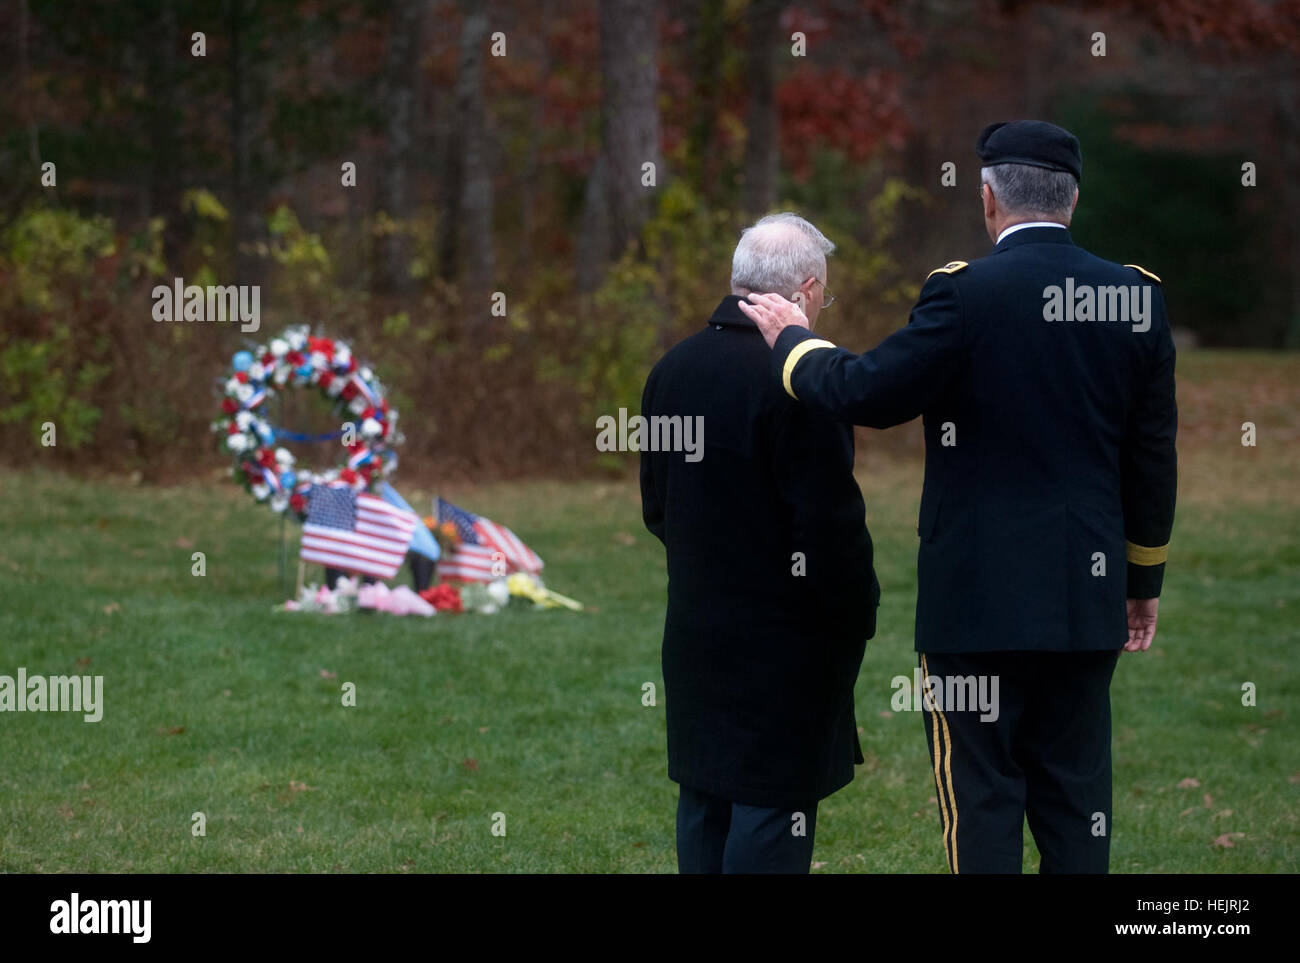 Paul Monti, father of Medal of Honor recipient Jared C. Monti, and Army Chief of Staff Gen. George W. Casey Jr., stand near Sgt 1st Class Monti's gravesite on Veterans Day at the Mass. National Ceremony in Bourne, Nov. 11, 2009.  SFC Jared C. Monti was posthumously awarded the nation's highest award for valor, the Medal Of Honor.  Army photo by D. Myles Cullen (released) Flickr - The U.S. Army - Remembering Sgt. 1st Class Jared C. Monti on Veterans Day Stock Photo